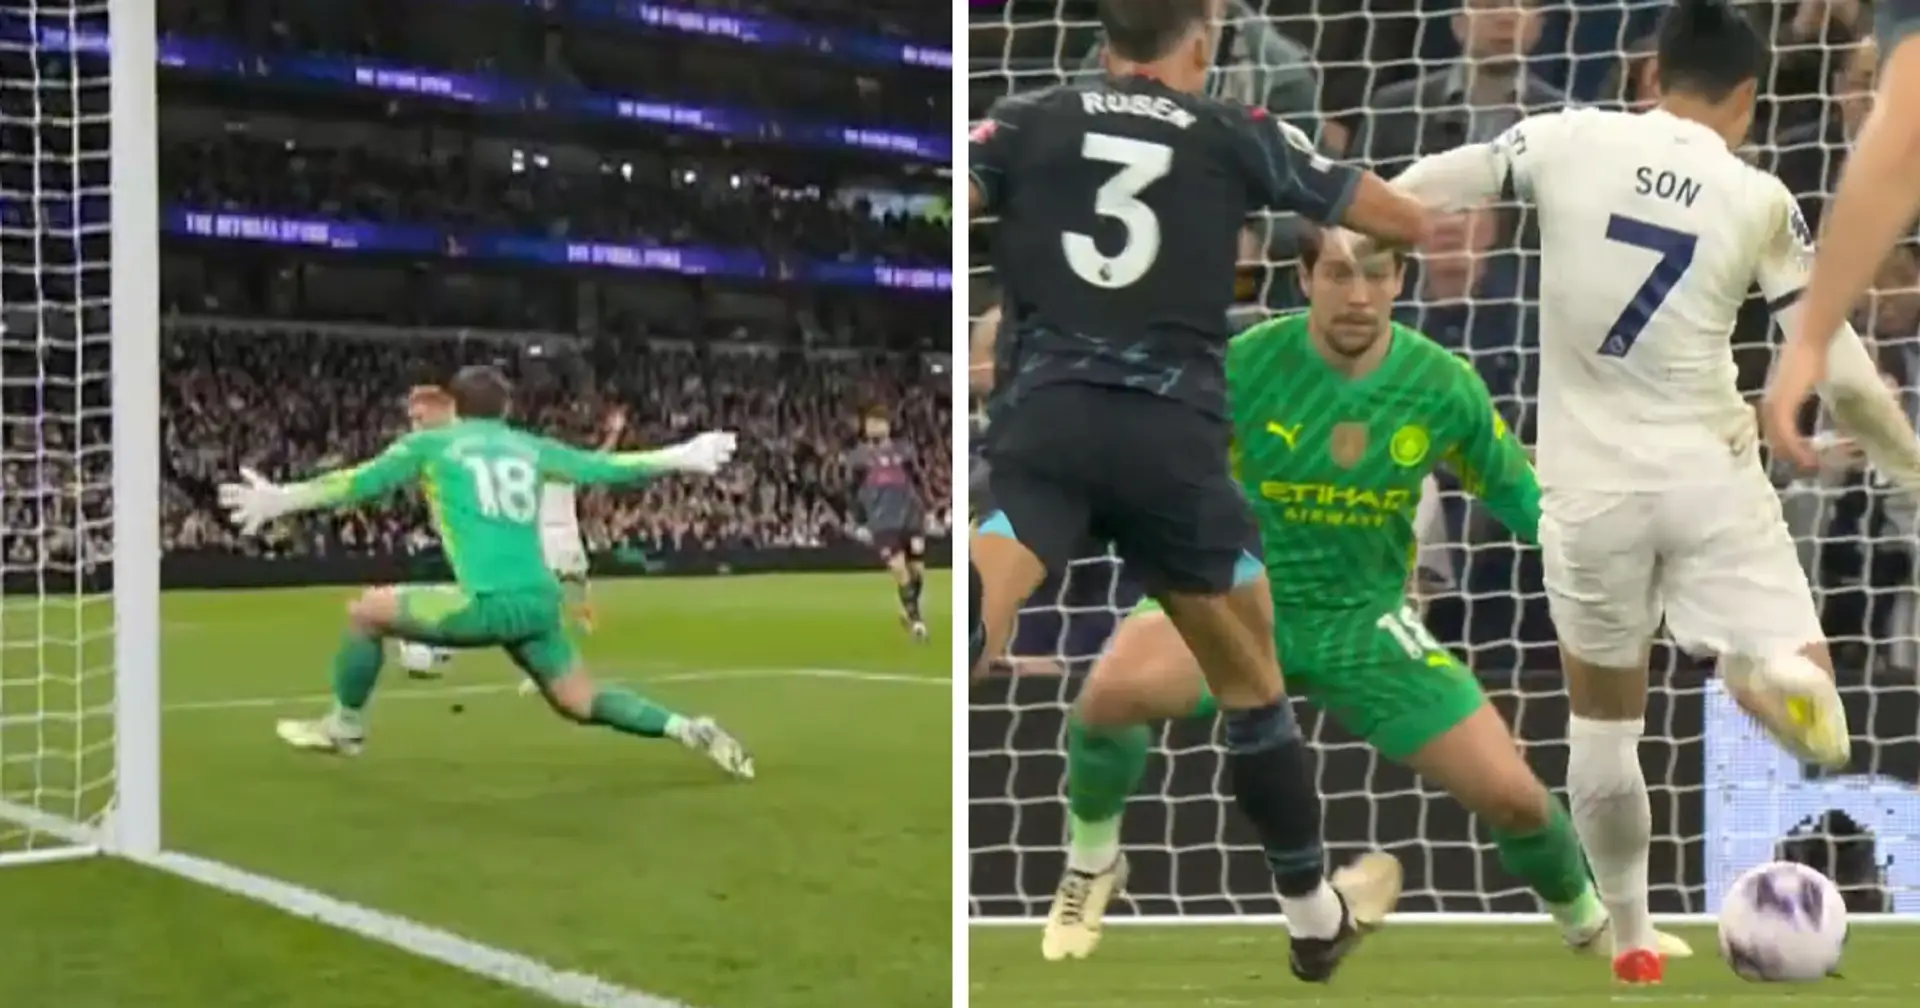 'I have no words': Rodri left speechless as Stefan Ortega saves Man City after Ederson collision  